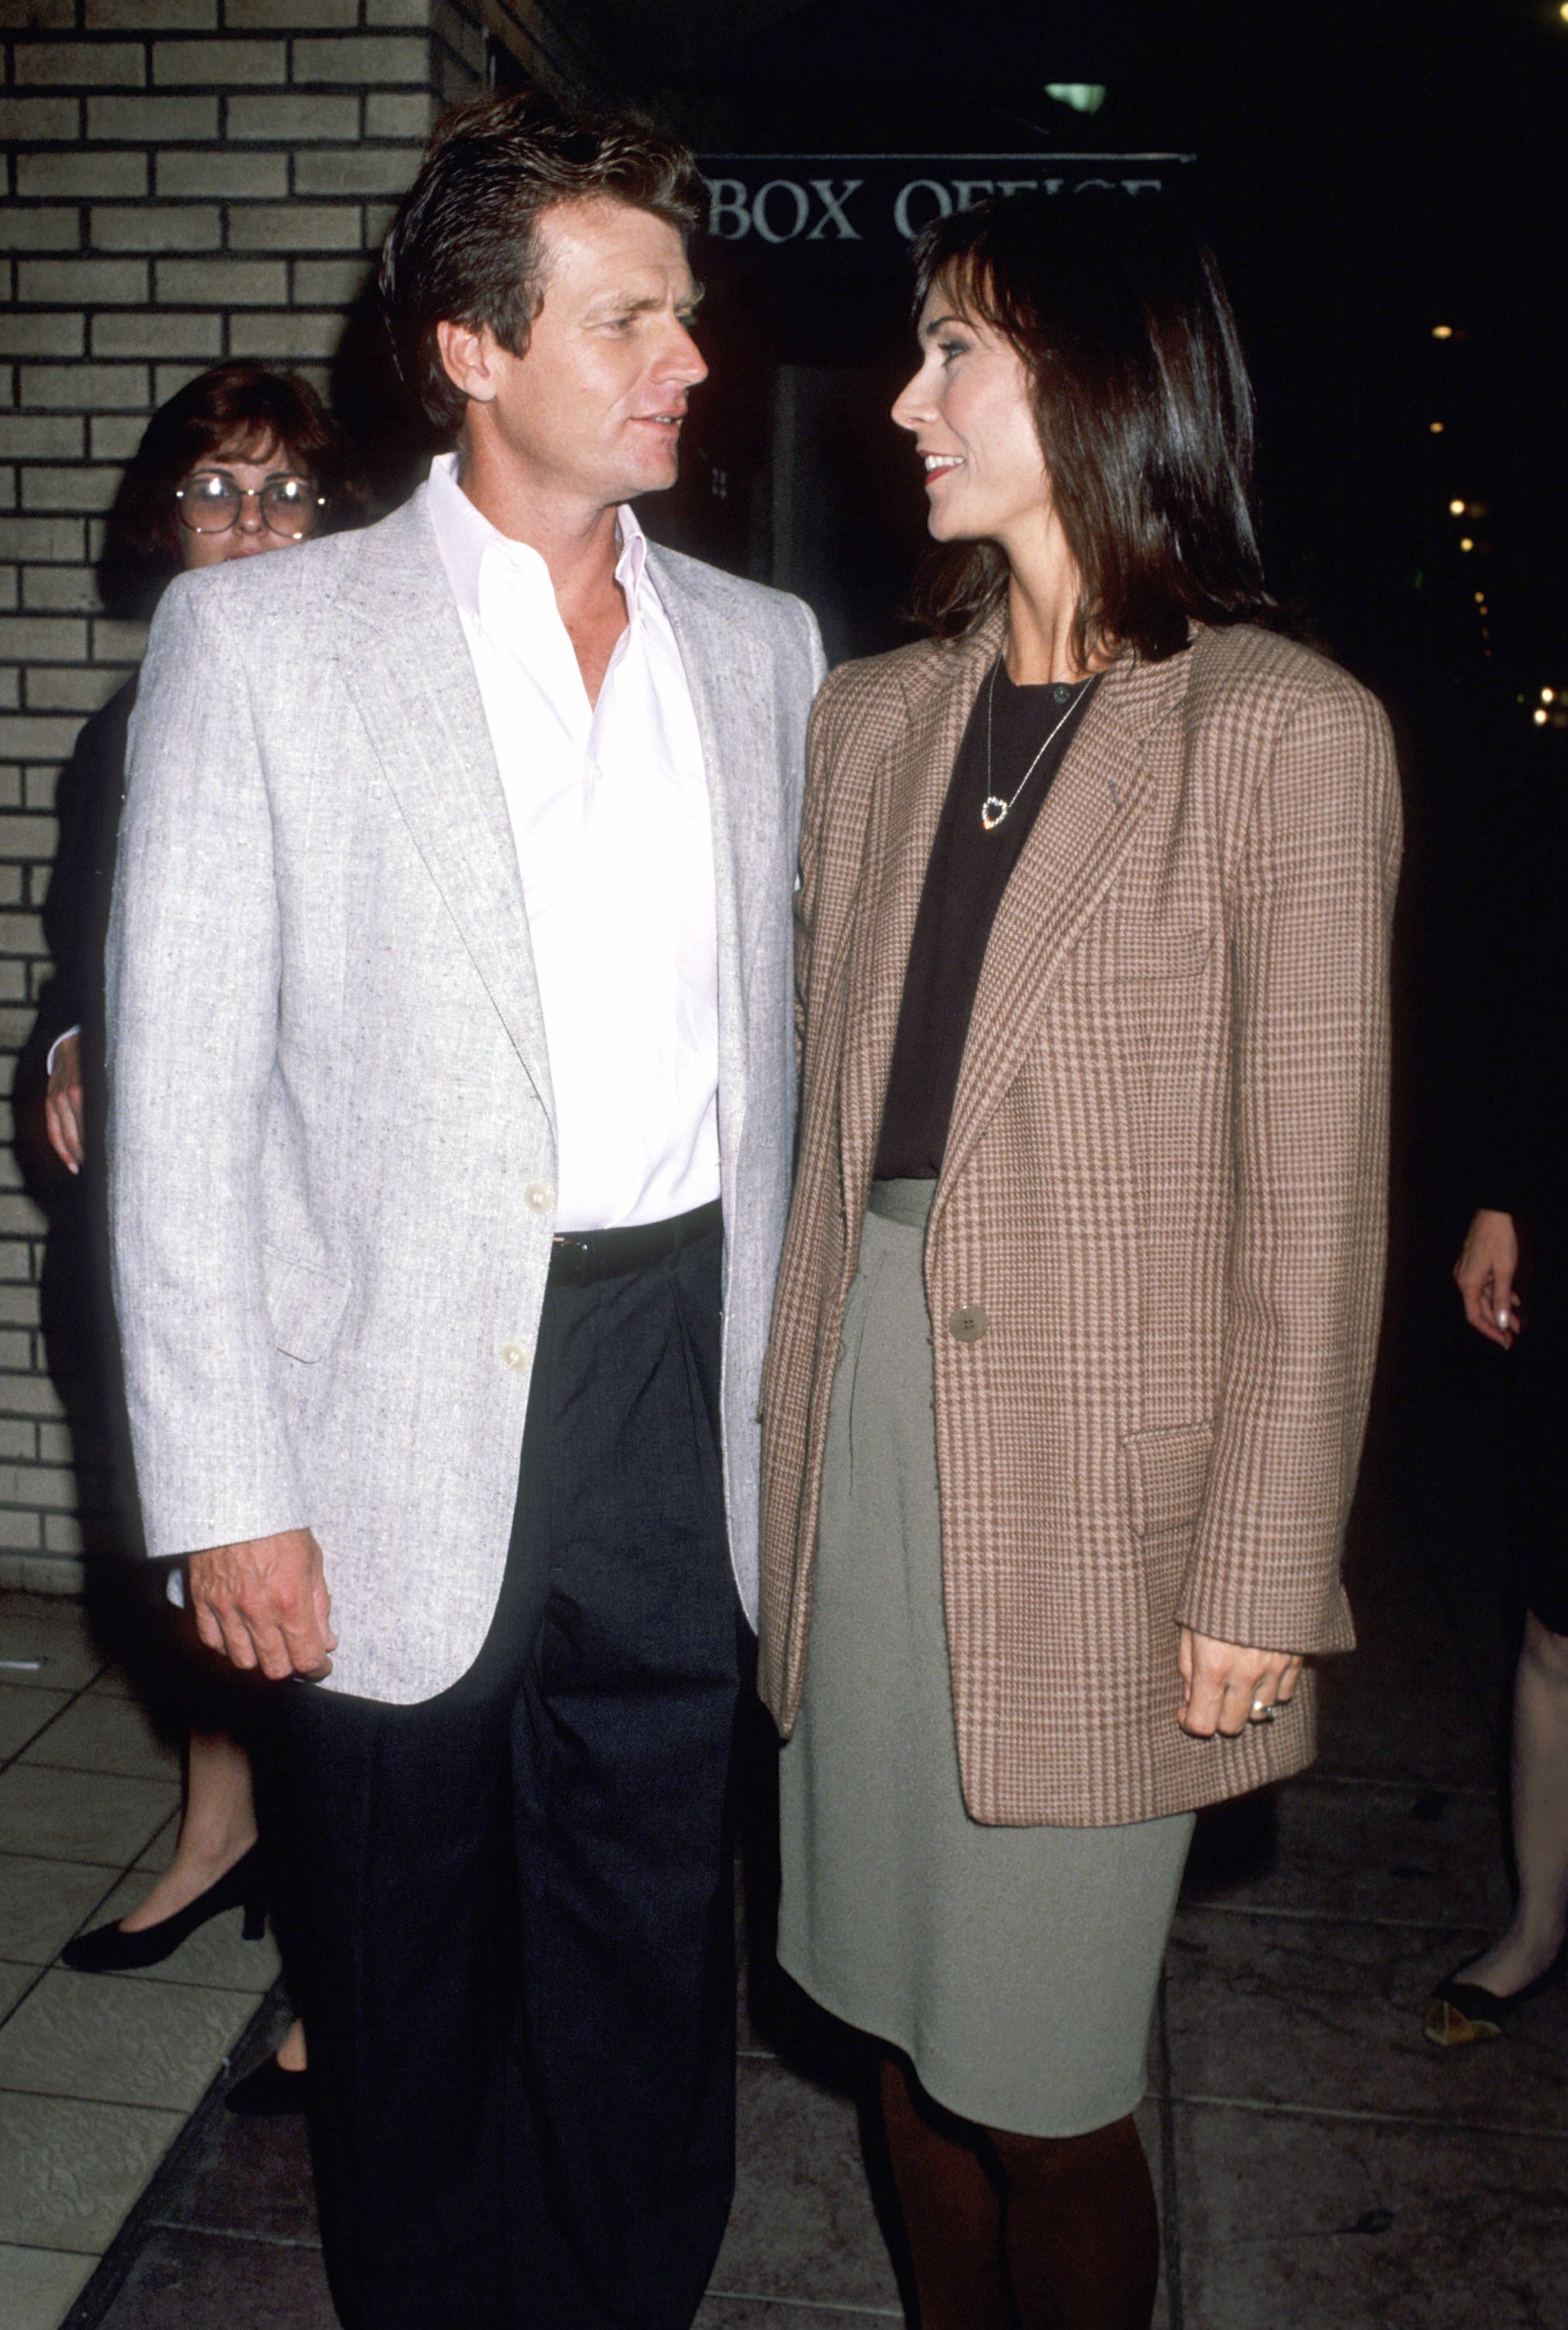 Businessman Tom Hart and Kate Jackson during the "Search for Signs" Los Angeles premiere. / Source: Getty Images